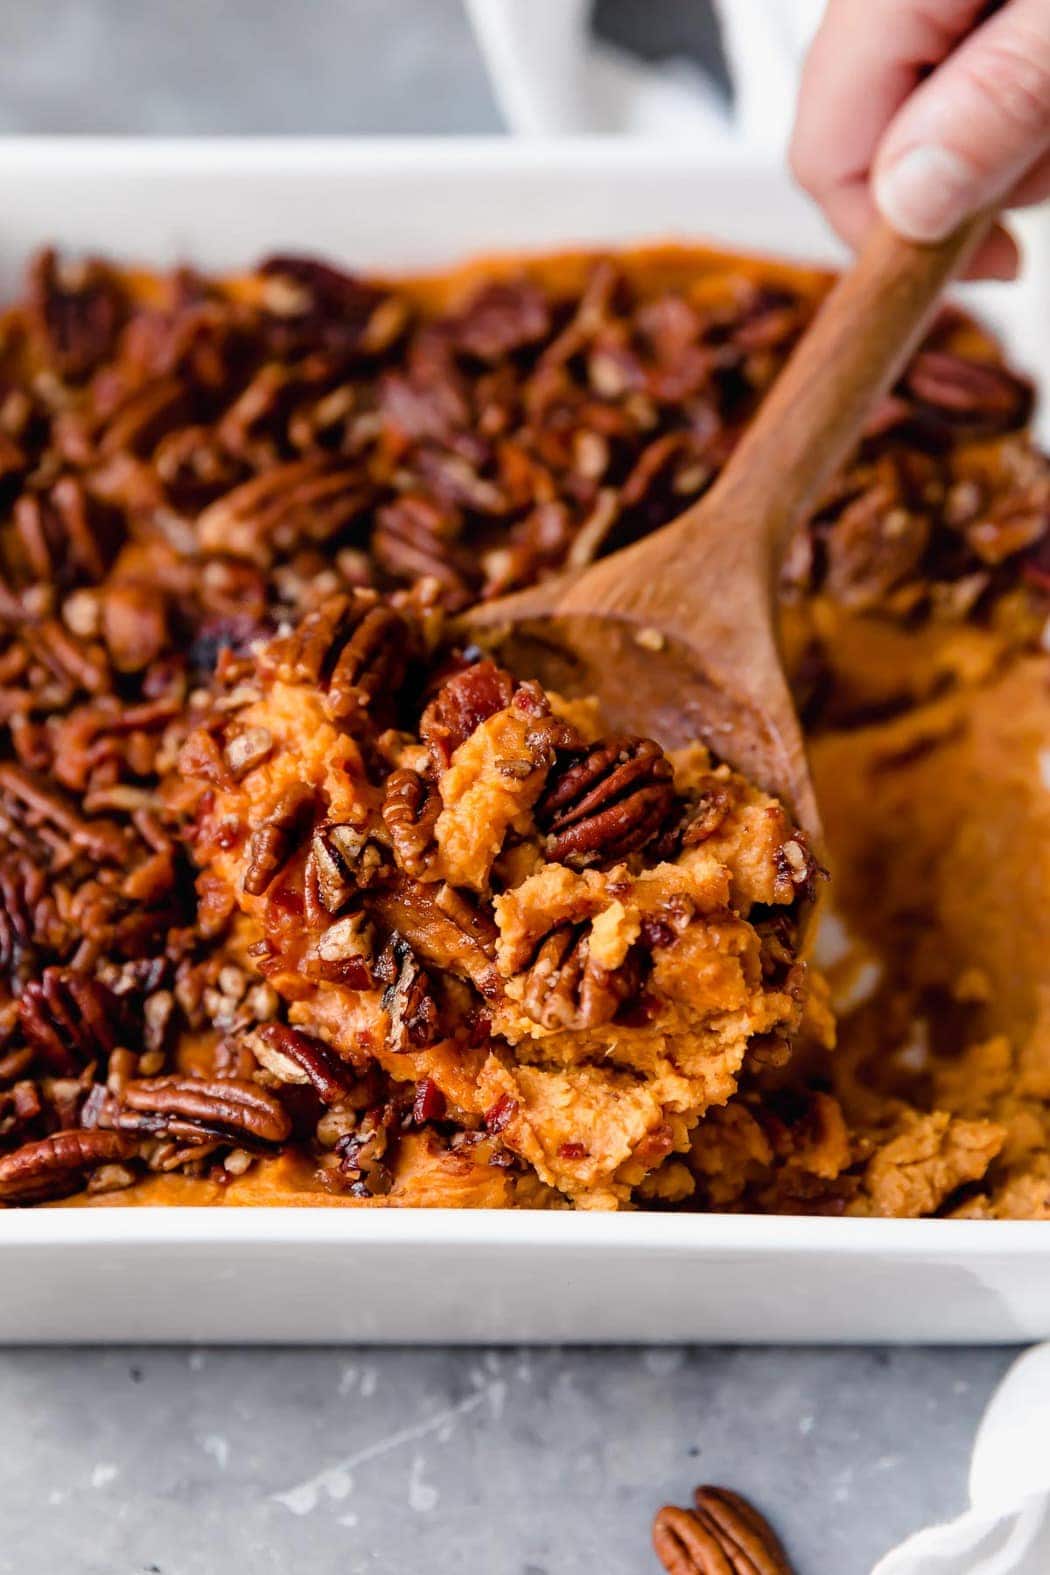 Healthy Sweet Potato Casserole with Pecans - The Real Food Dietitians